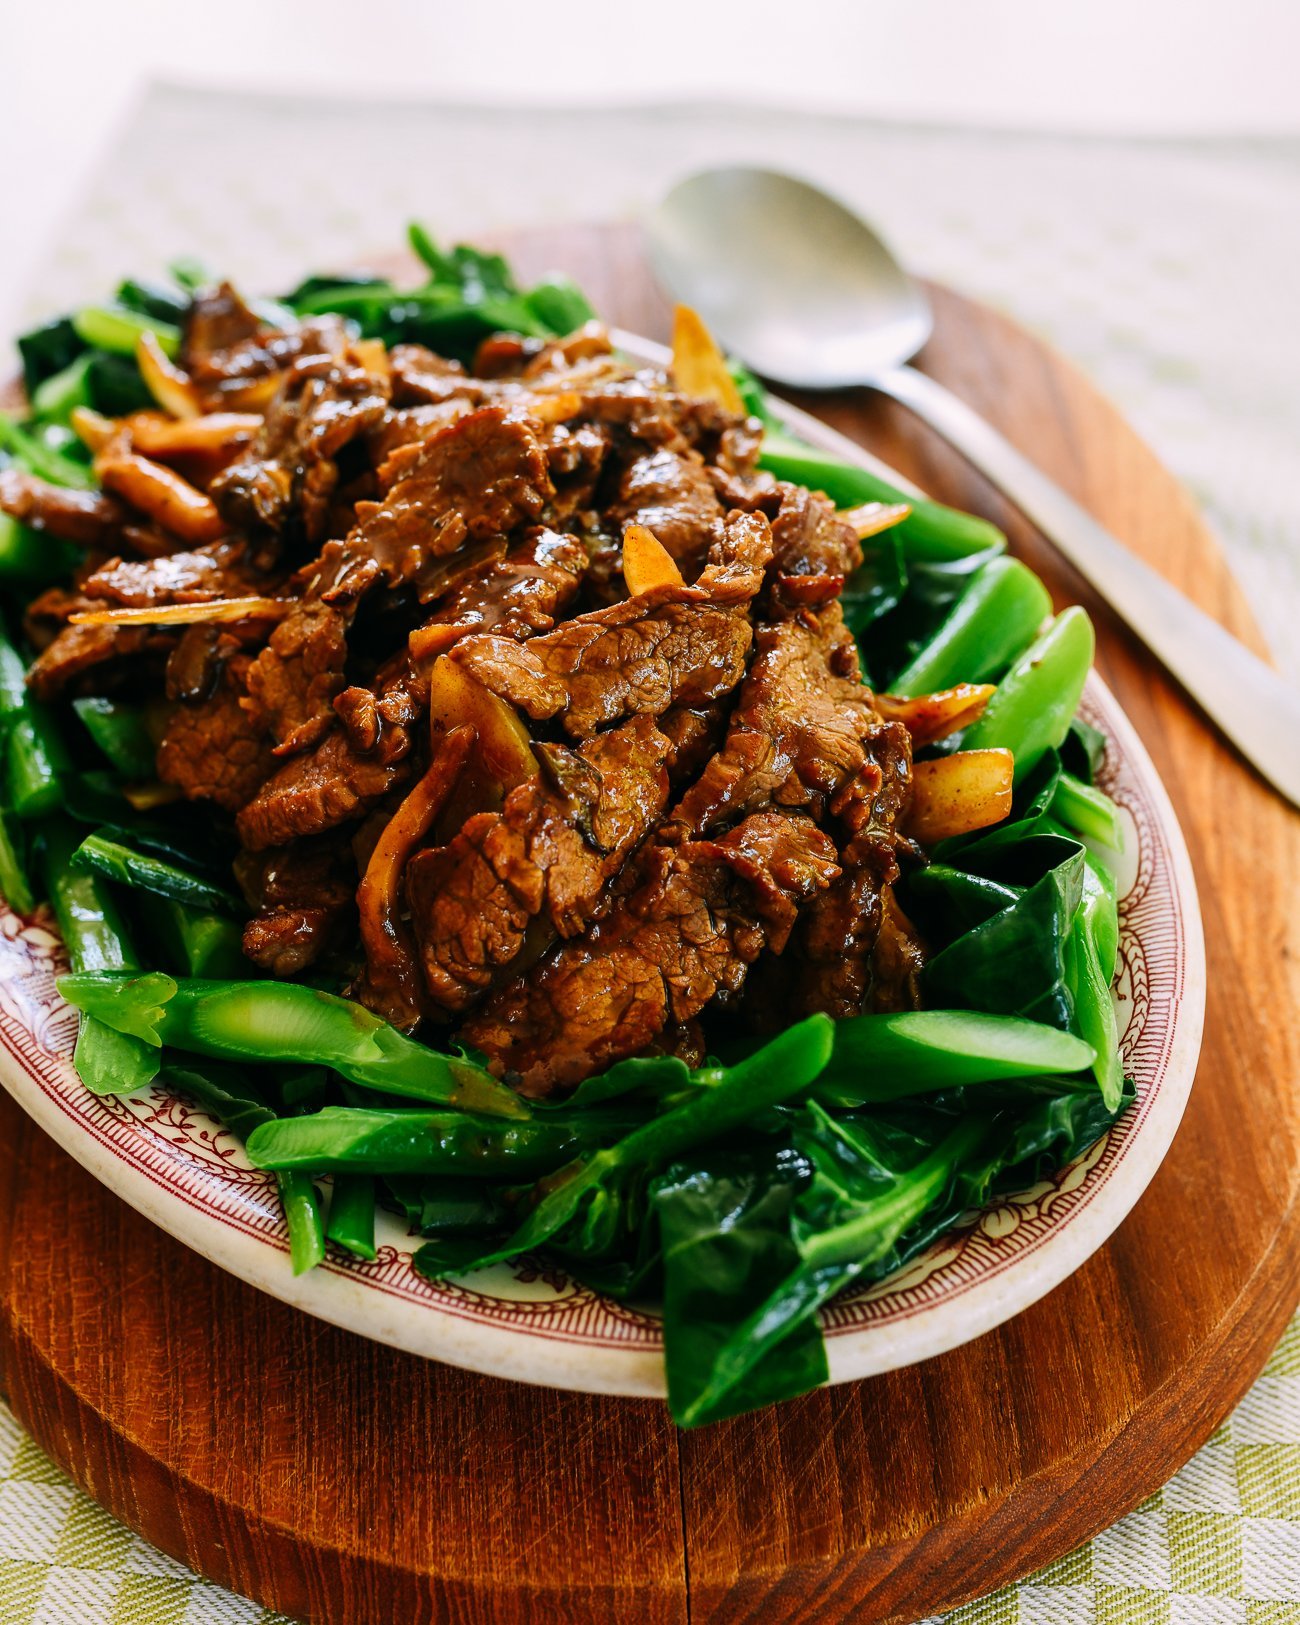 Beef with oyster sauce on a bed of Chinese broccoli